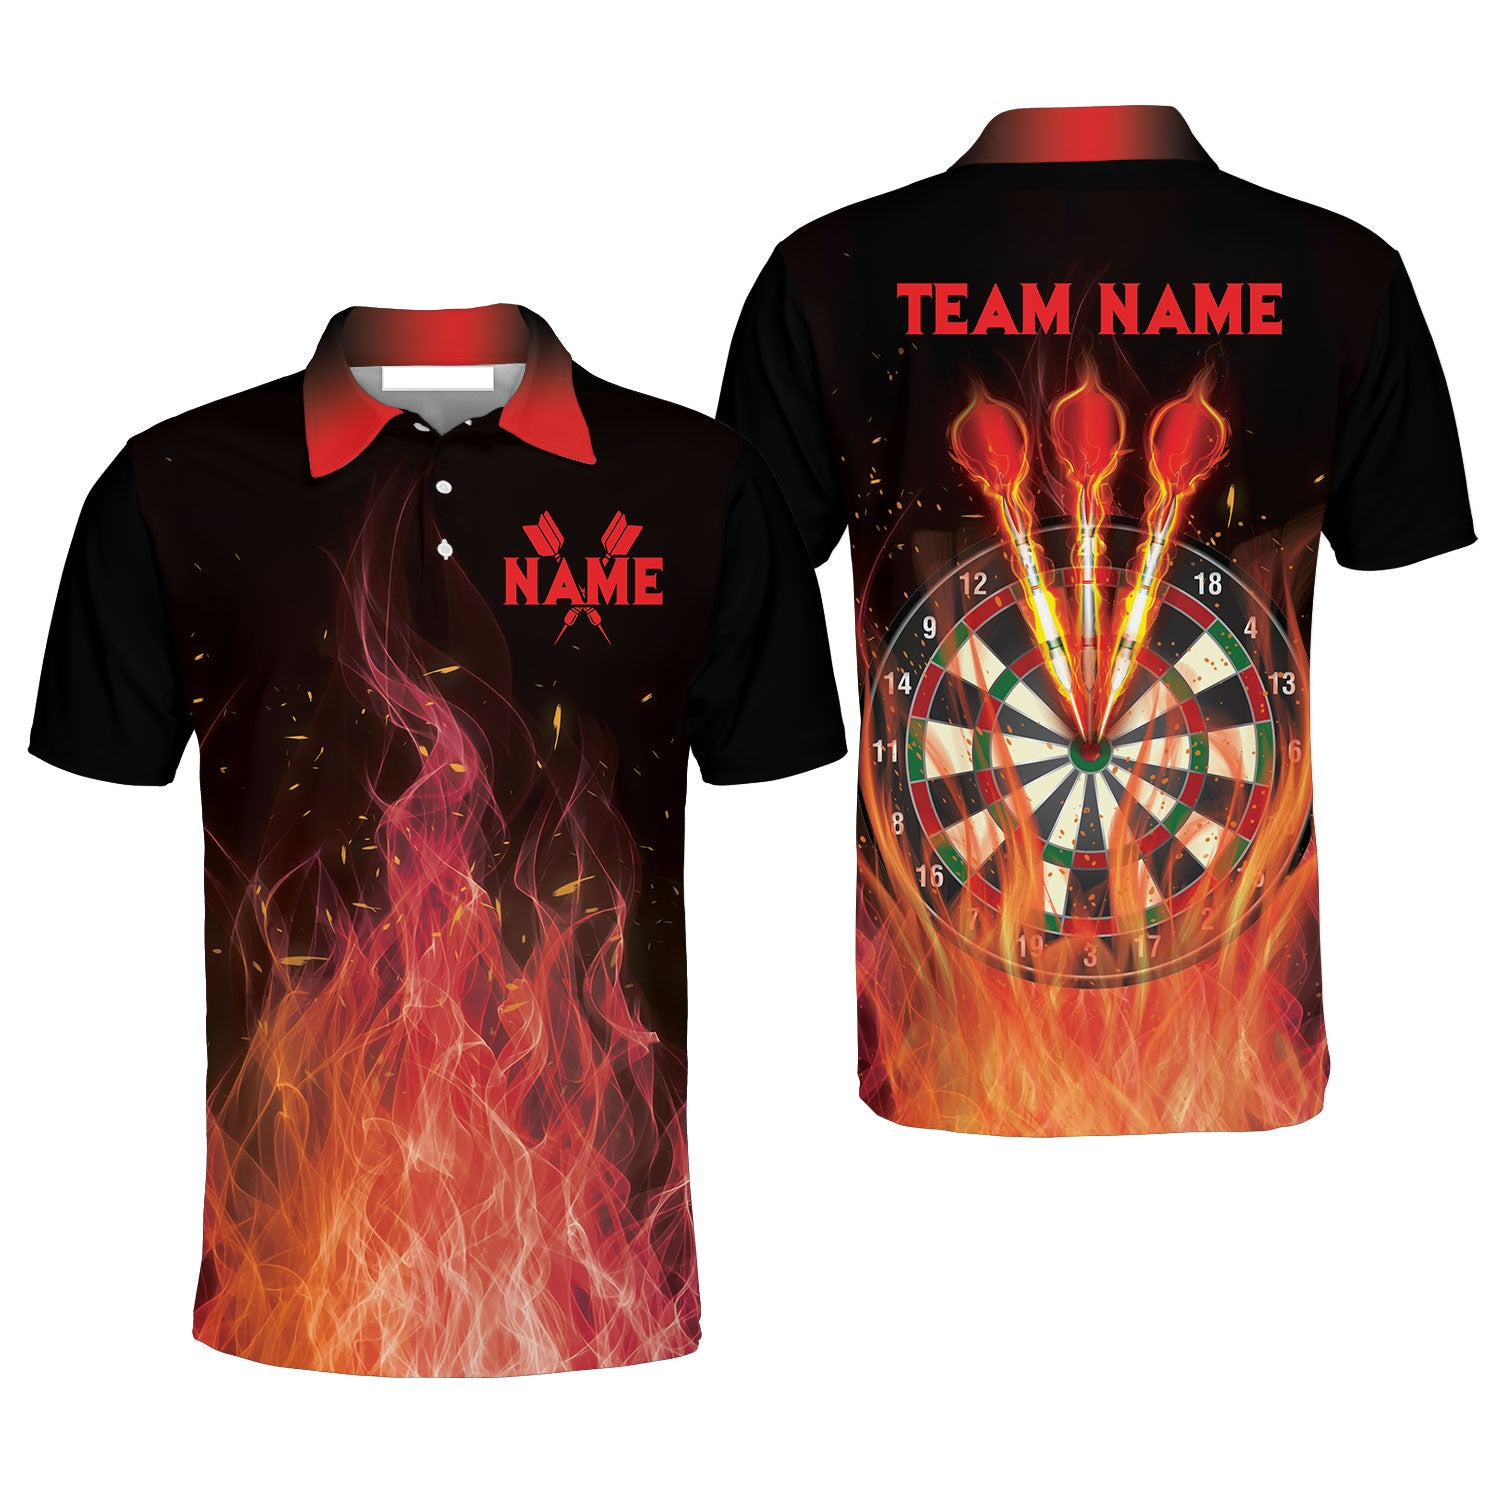 Darts Polo Shirt Custom Name And Team Name/ Darts Flame Player Uniform/ Personalized Shirt For Darts Lovers/ Darts Players